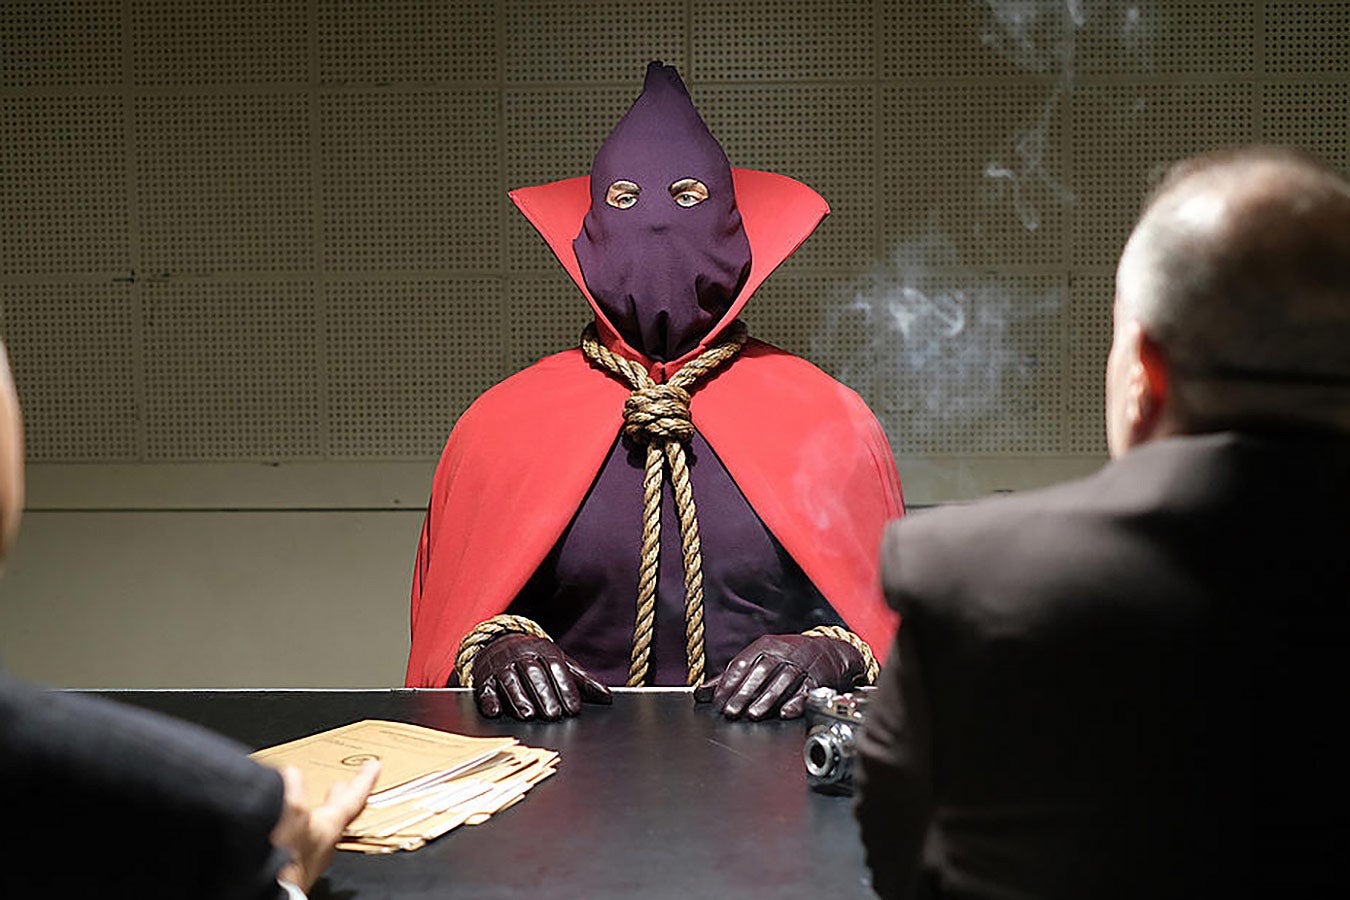 Hooded Justice sits at a table during a police interrogation.